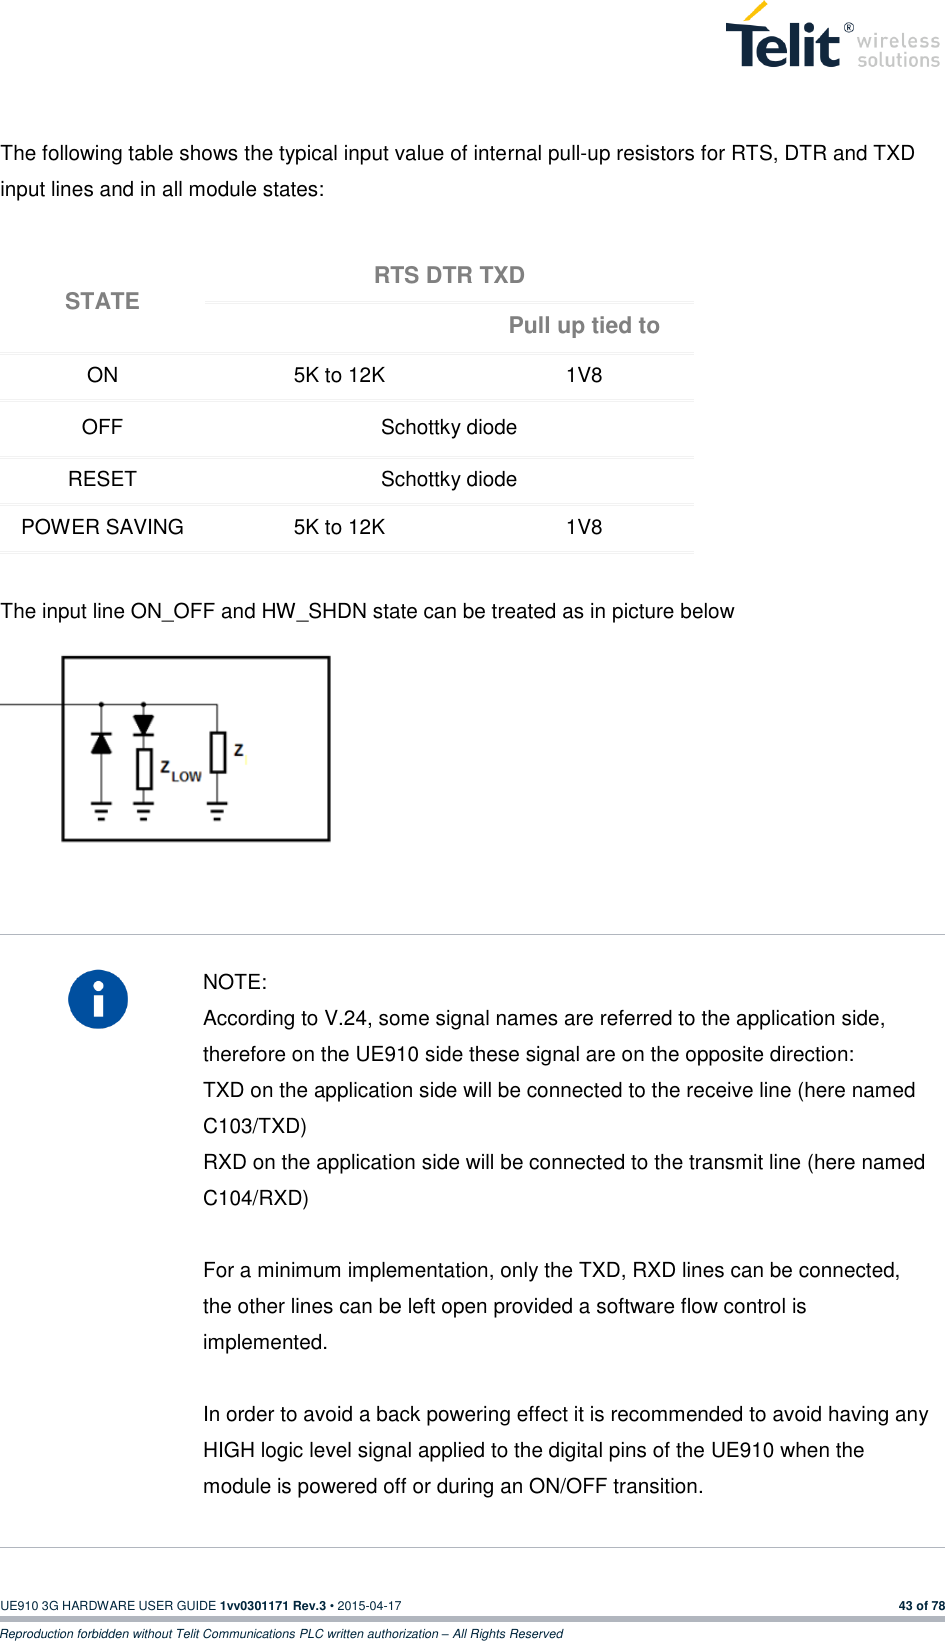  UE910 3G HARDWARE USER GUIDE 1vv0301171 Rev.3 • 2015-04-17 43 of 78 Reproduction forbidden without Telit Communications PLC written authorization – All Rights Reserved   The following table shows the typical input value of internal pull-up resistors for RTS, DTR and TXD input lines and in all module states: STATE RTS DTR TXD  Pull up tied to ON 5K to 12K 1V8 OFF Schottky diode RESET Schottky diode POWER SAVING 5K to 12K 1V8  The input line ON_OFF and HW_SHDN state can be treated as in picture below                NOTE: According to V.24, some signal names are referred to the application side, therefore on the UE910 side these signal are on the opposite direction:  TXD on the application side will be connected to the receive line (here named C103/TXD) RXD on the application side will be connected to the transmit line (here named C104/RXD)  For a minimum implementation, only the TXD, RXD lines can be connected, the other lines can be left open provided a software flow control is implemented.  In order to avoid a back powering effect it is recommended to avoid having any HIGH logic level signal applied to the digital pins of the UE910 when the module is powered off or during an ON/OFF transition.  